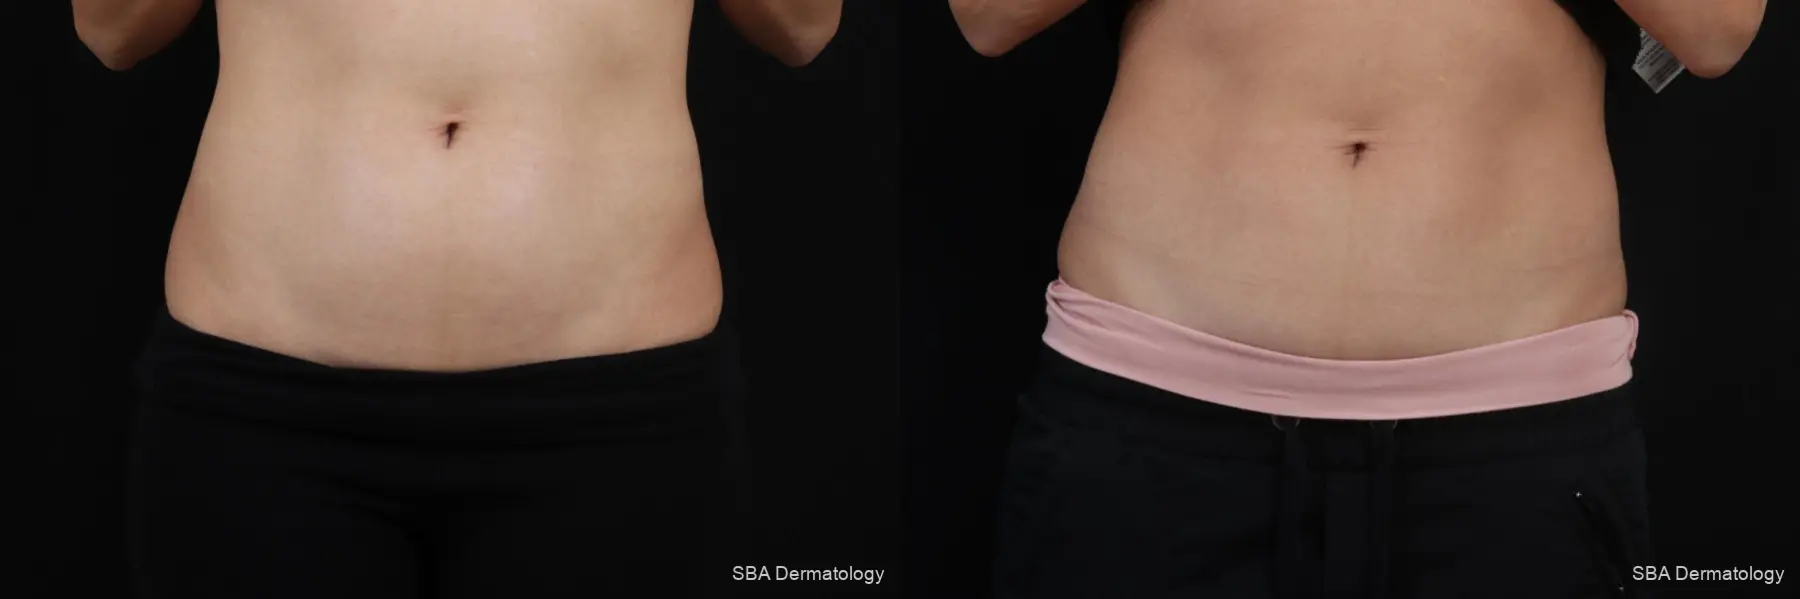 Coolsculpting: Patient 8 - Before and After 1